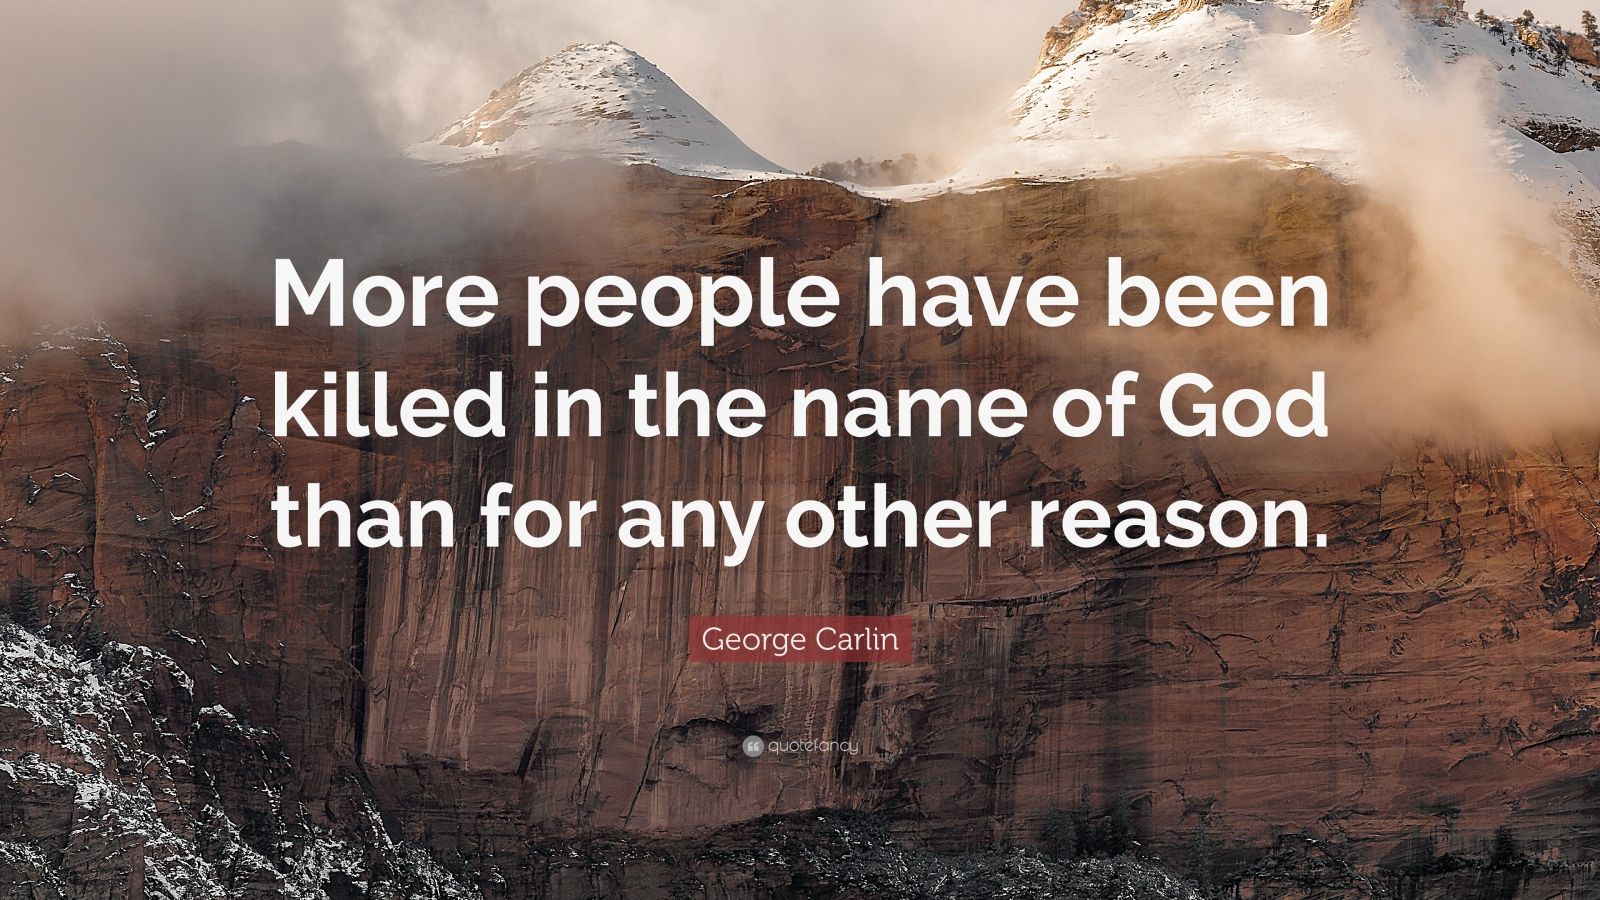 George Carlin Quote: “More people have been killed in the name of God